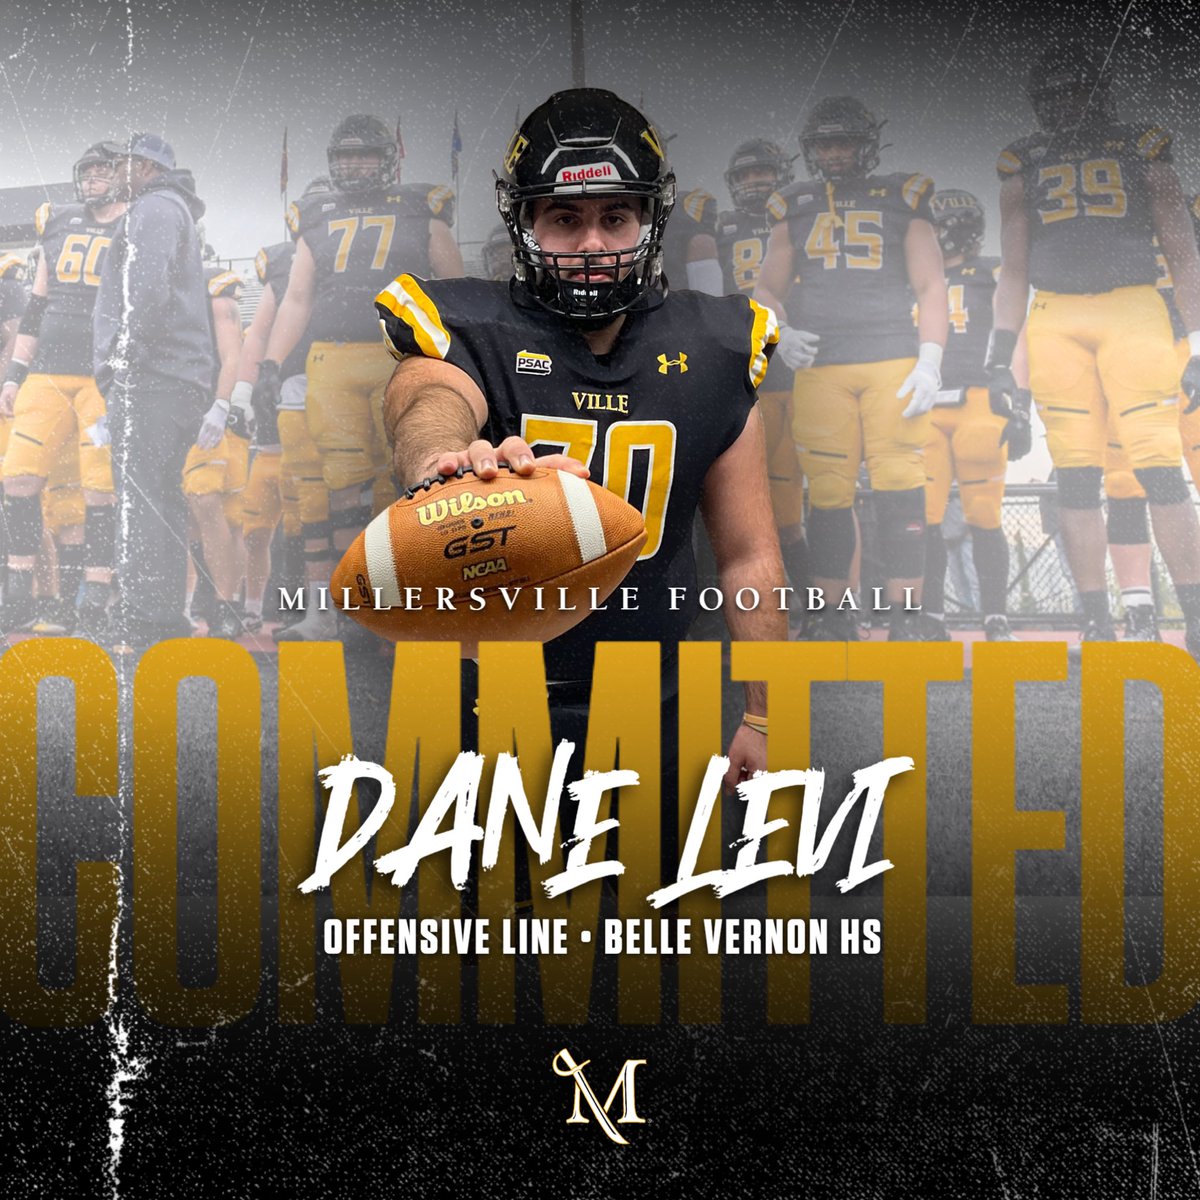 100% Committed‼️After much consideration with my family, I have decided to commit to Millersville University〽️🖤💛@CoachKelleher @DbeardDan @Coachjcmorgan @CoachTomasetti @BVAFootball @VilleMarauders